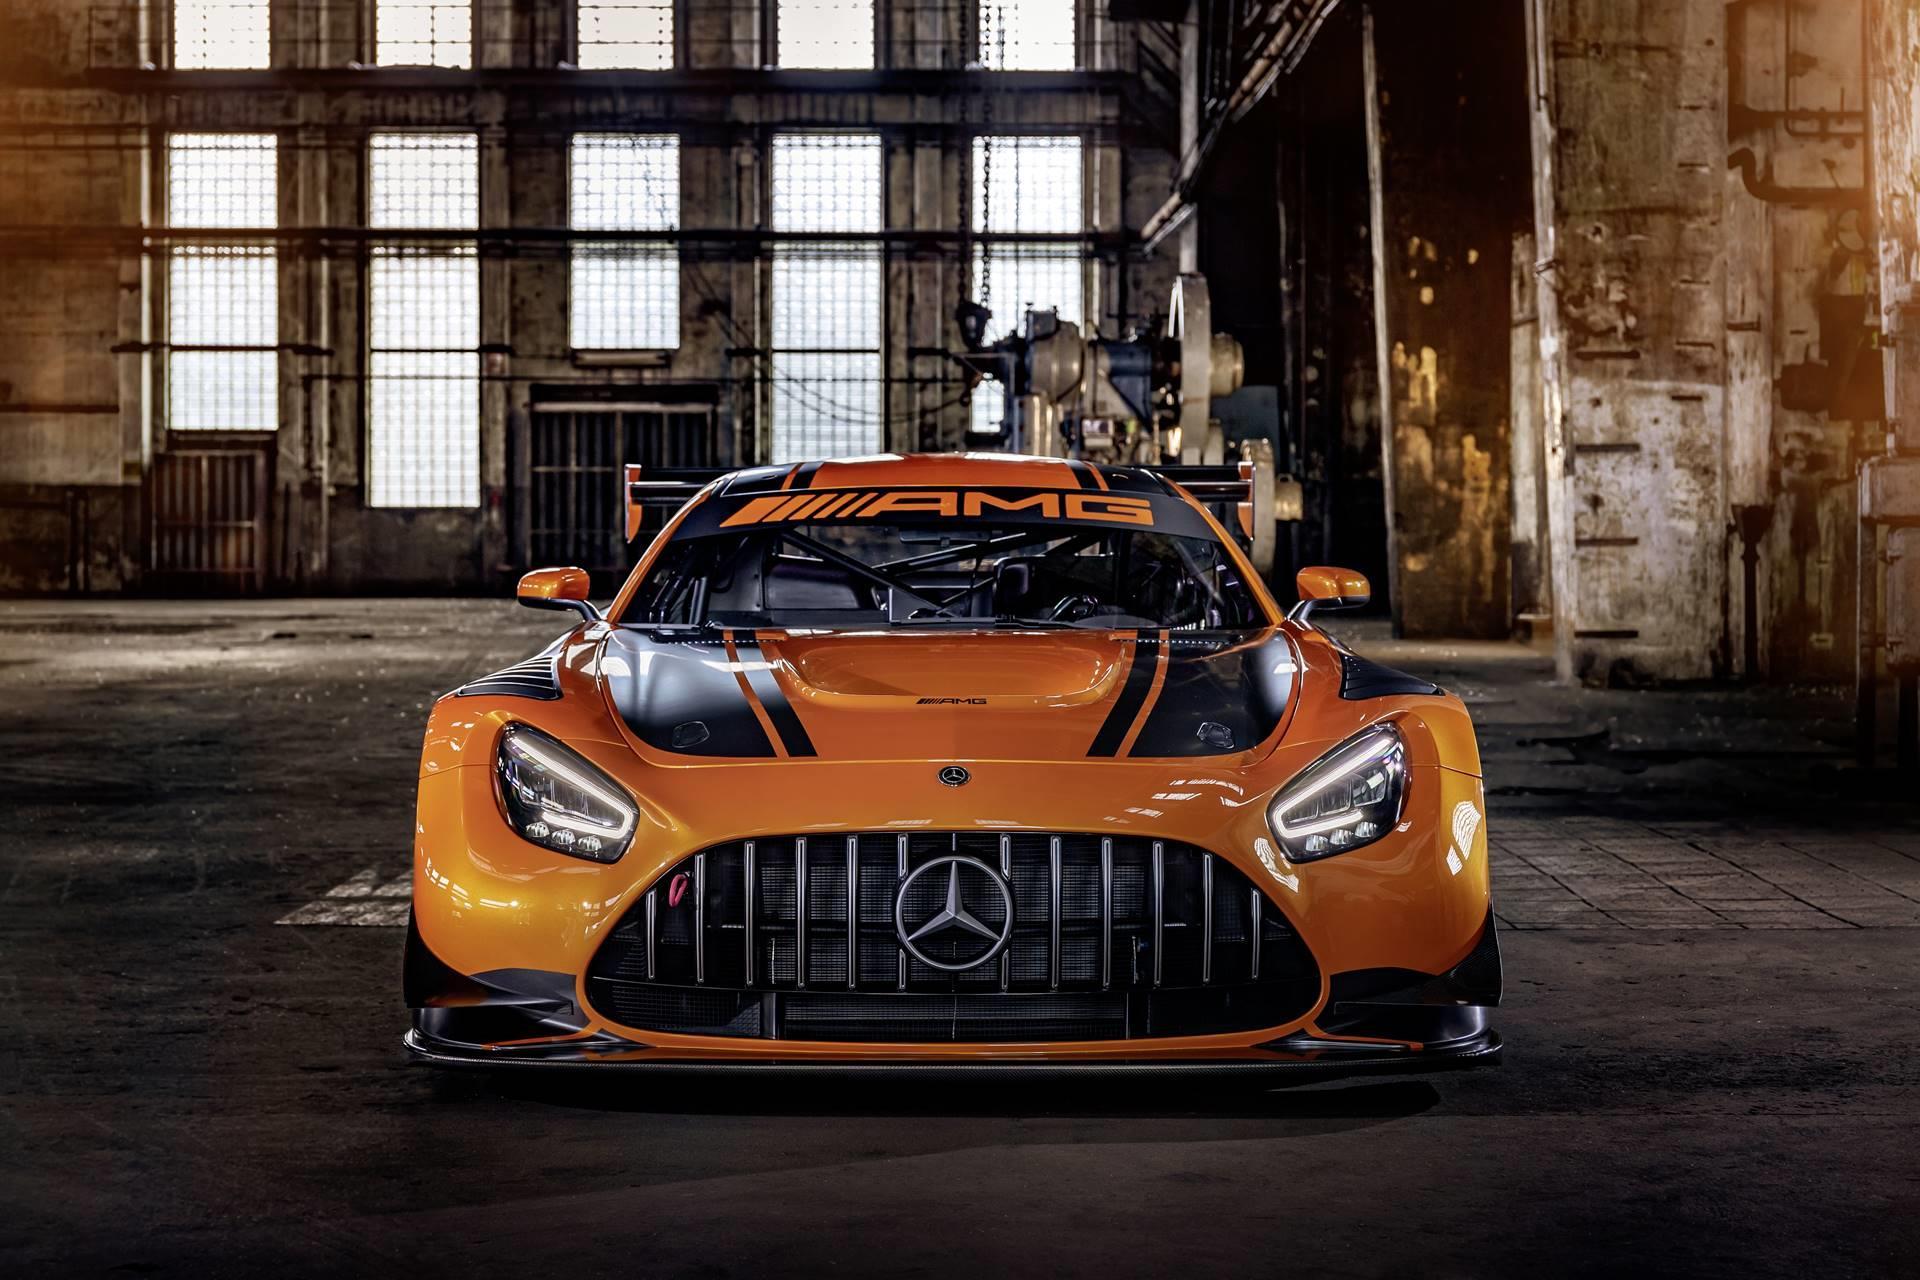 Mercedes Benz AMG GT3 Evo News And Information, Research